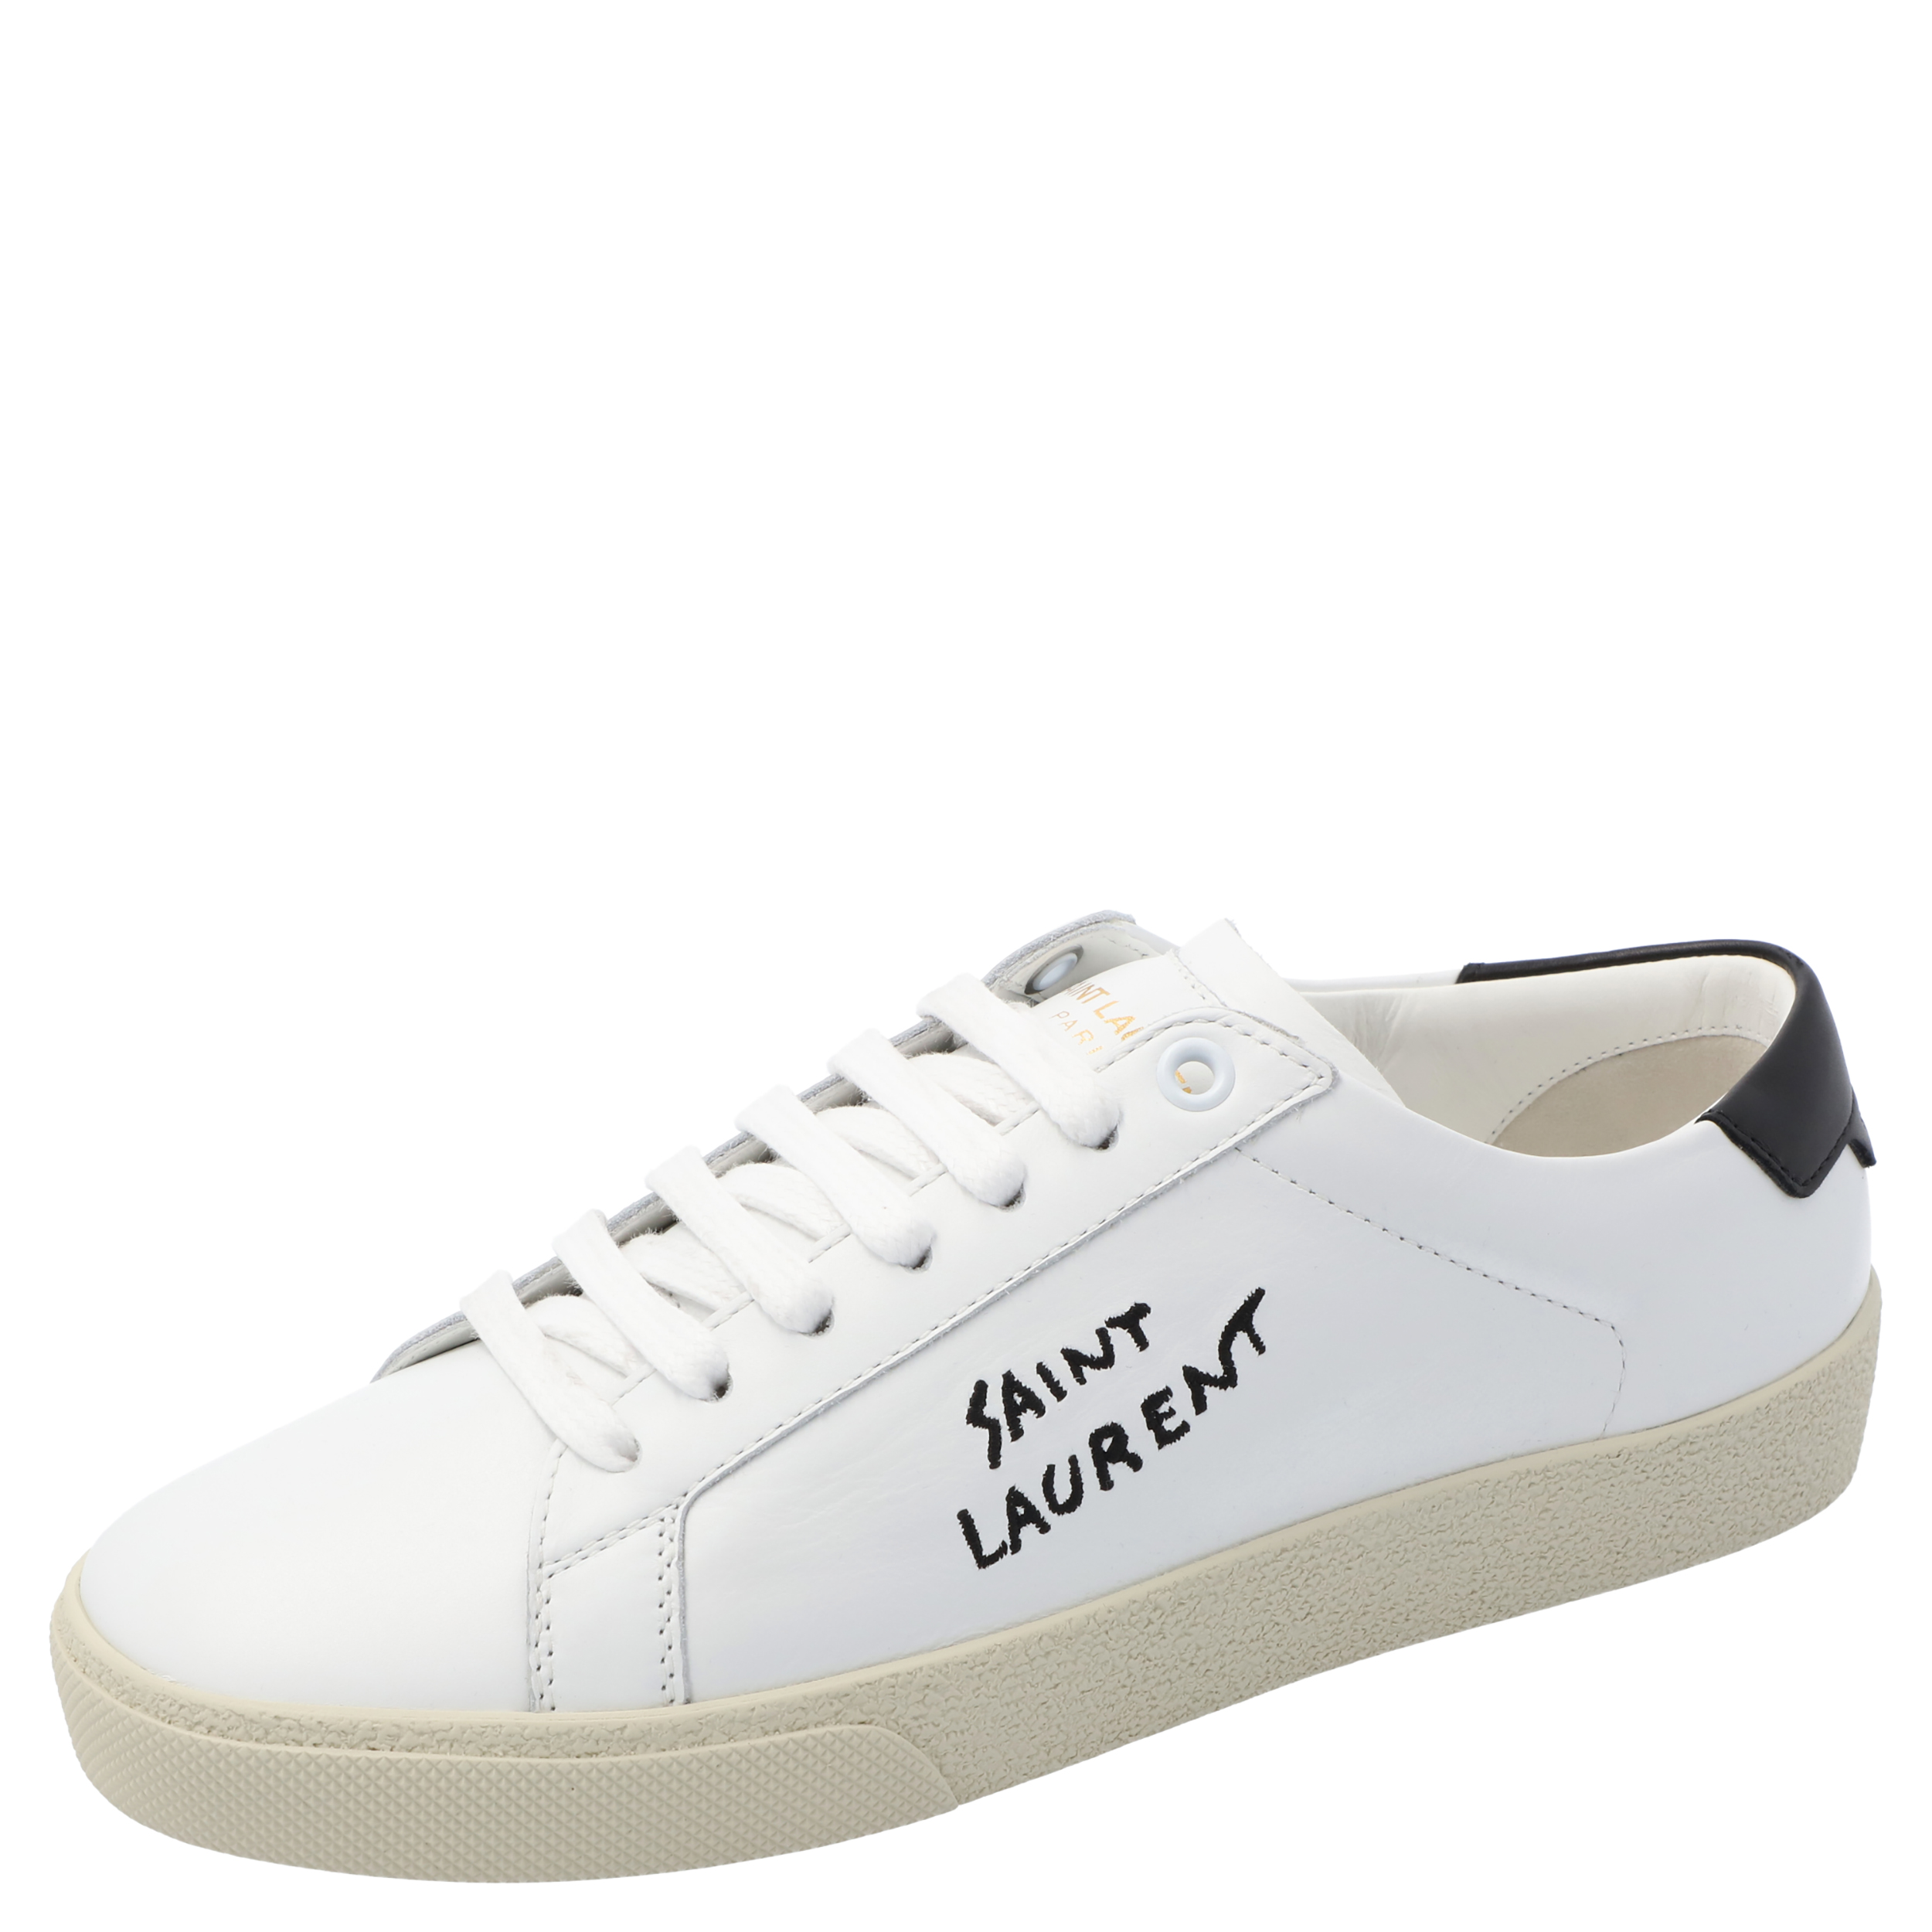 Pre-owned Saint Laurent White Leather Sl/06 Embroidered Court Classic Trainers Size Eu 36